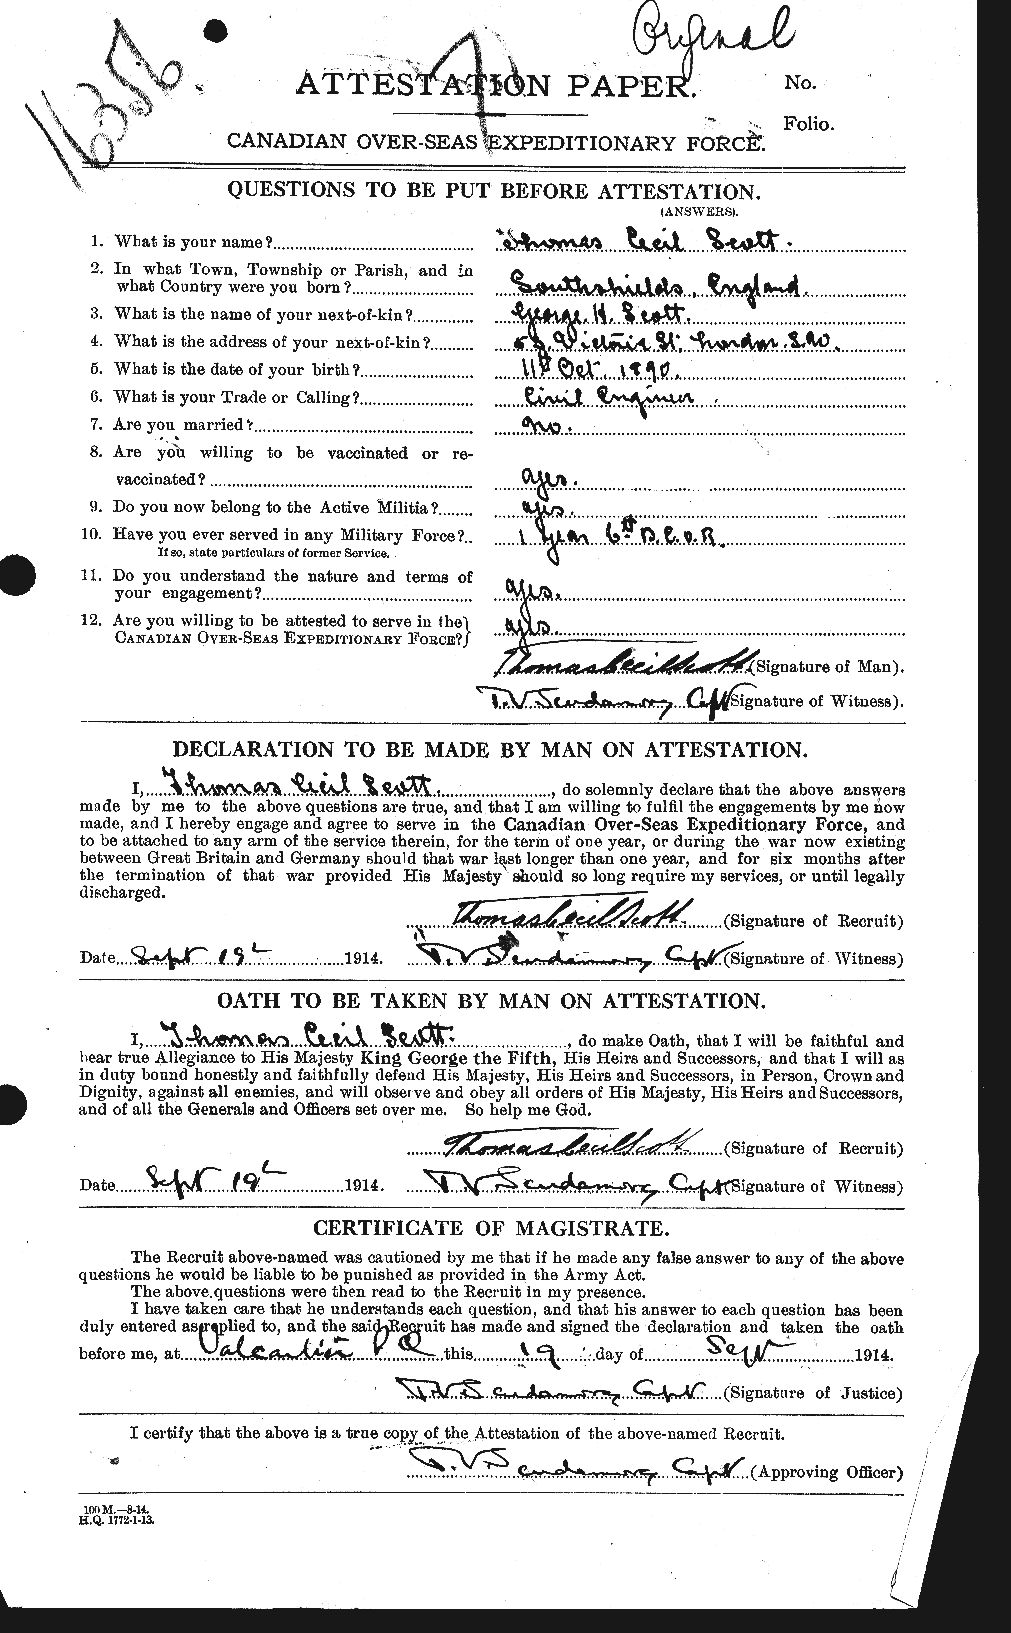 Personnel Records of the First World War - CEF 088521a